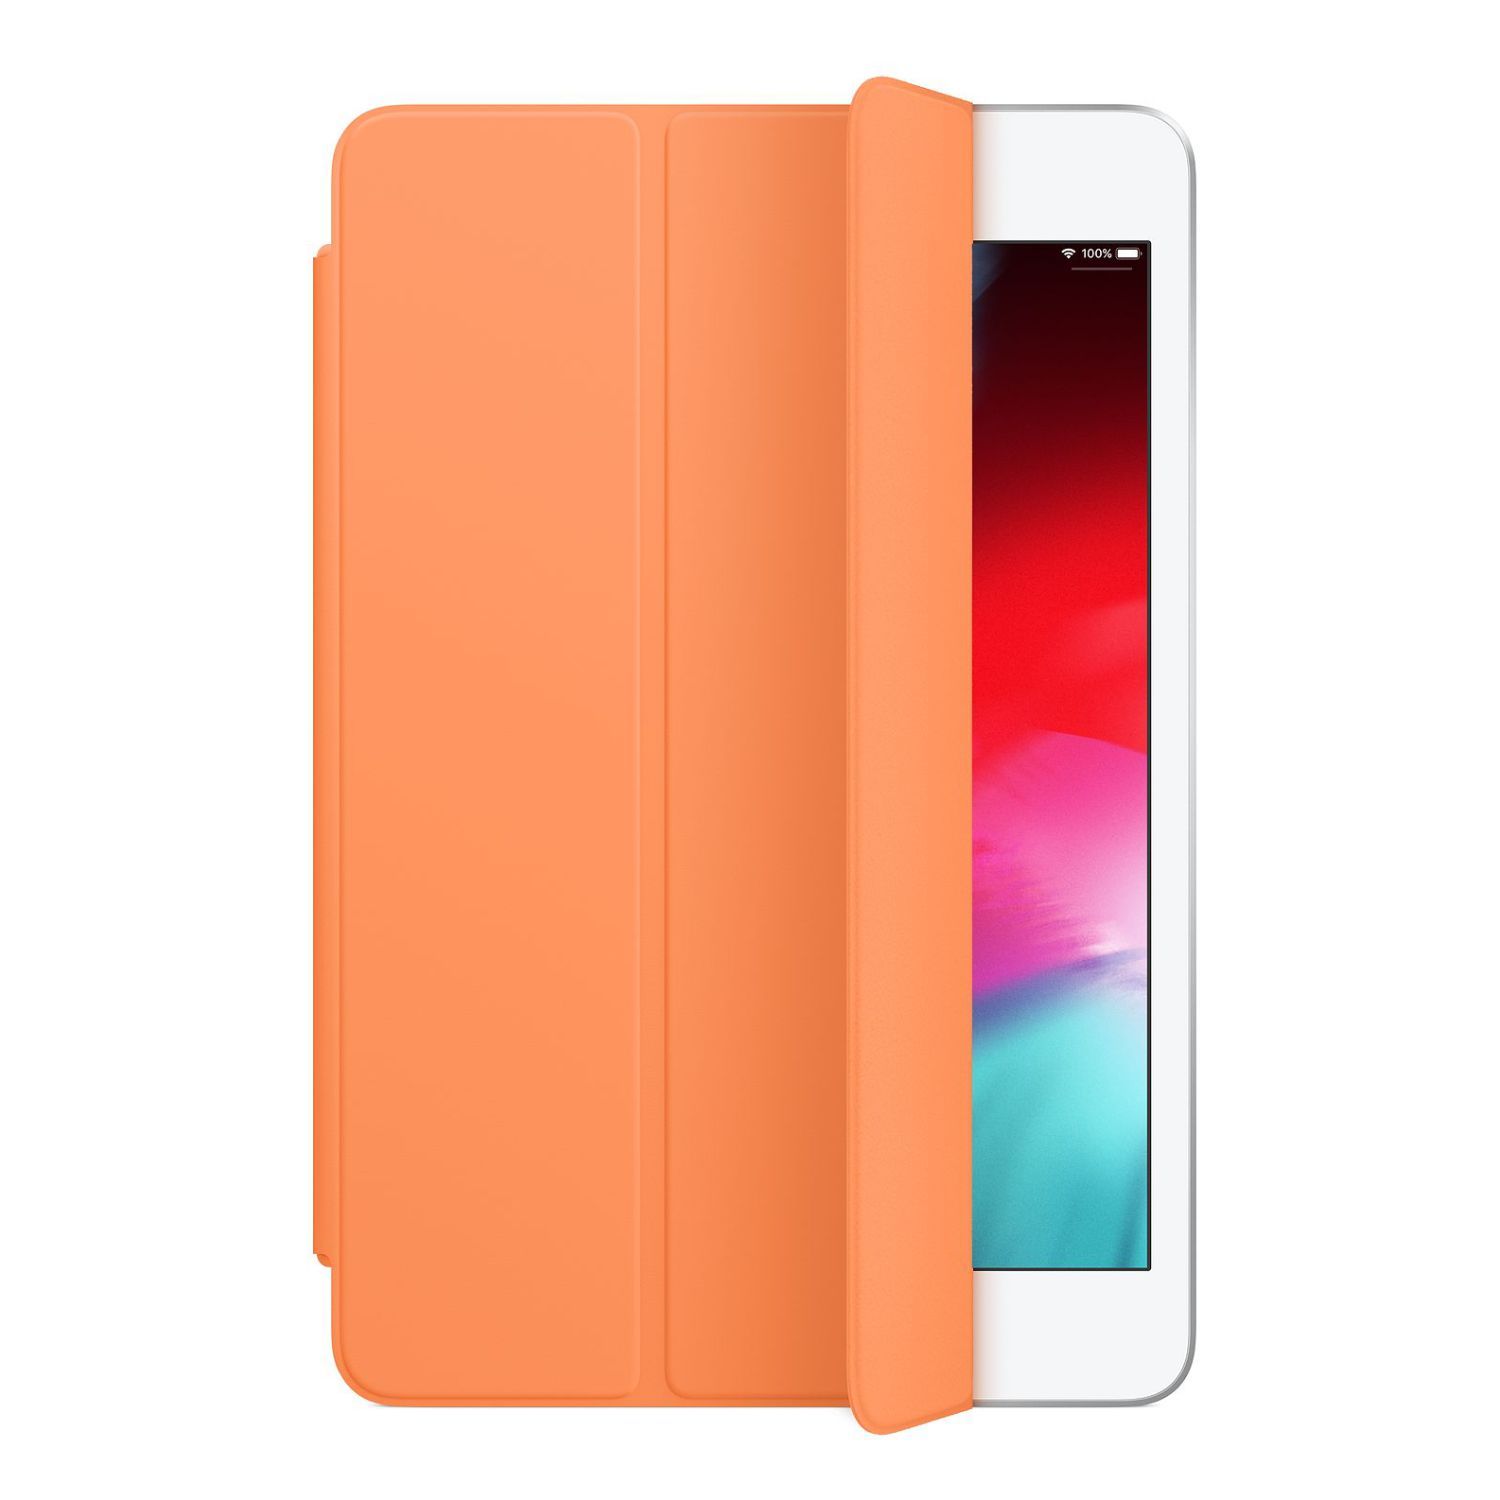 8 Best Ipad Mini Cases In 19 Sleek And Protective Ipad Mini Cases And Covers